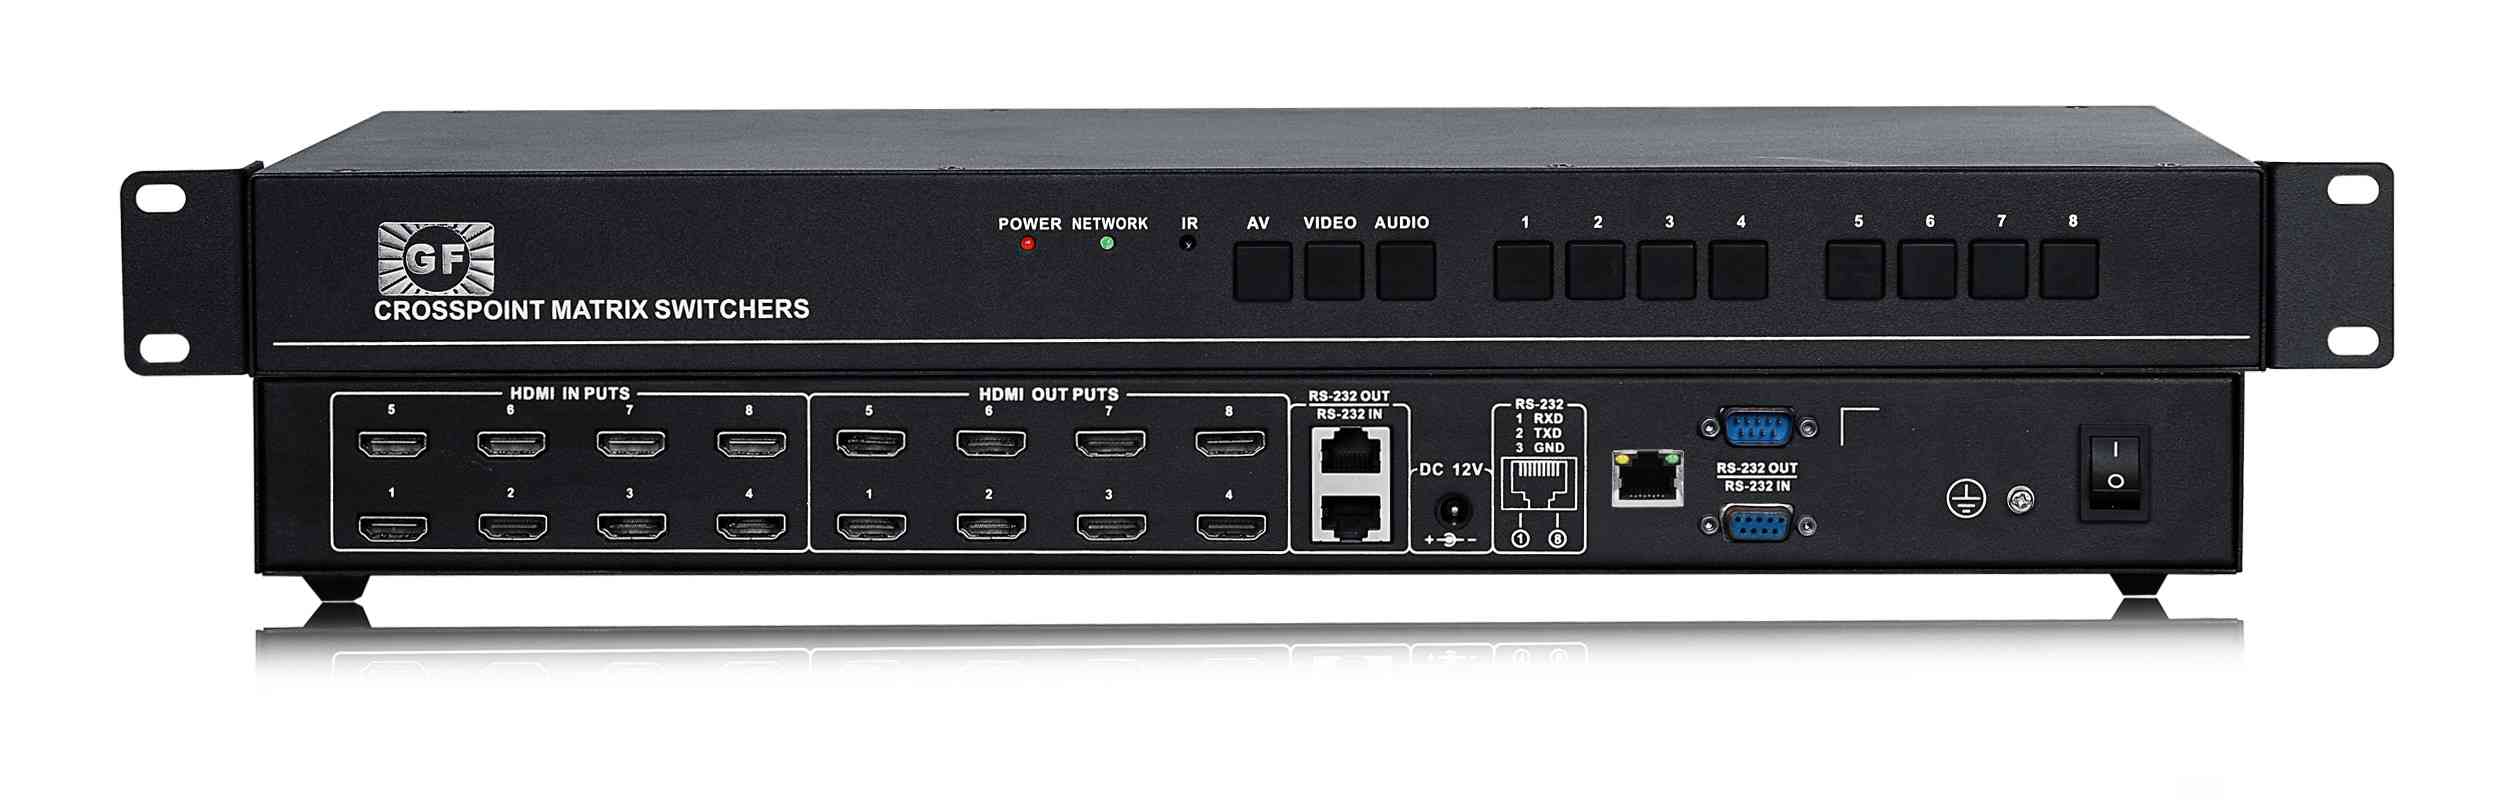 HDMI high-definition matrix with network control 8